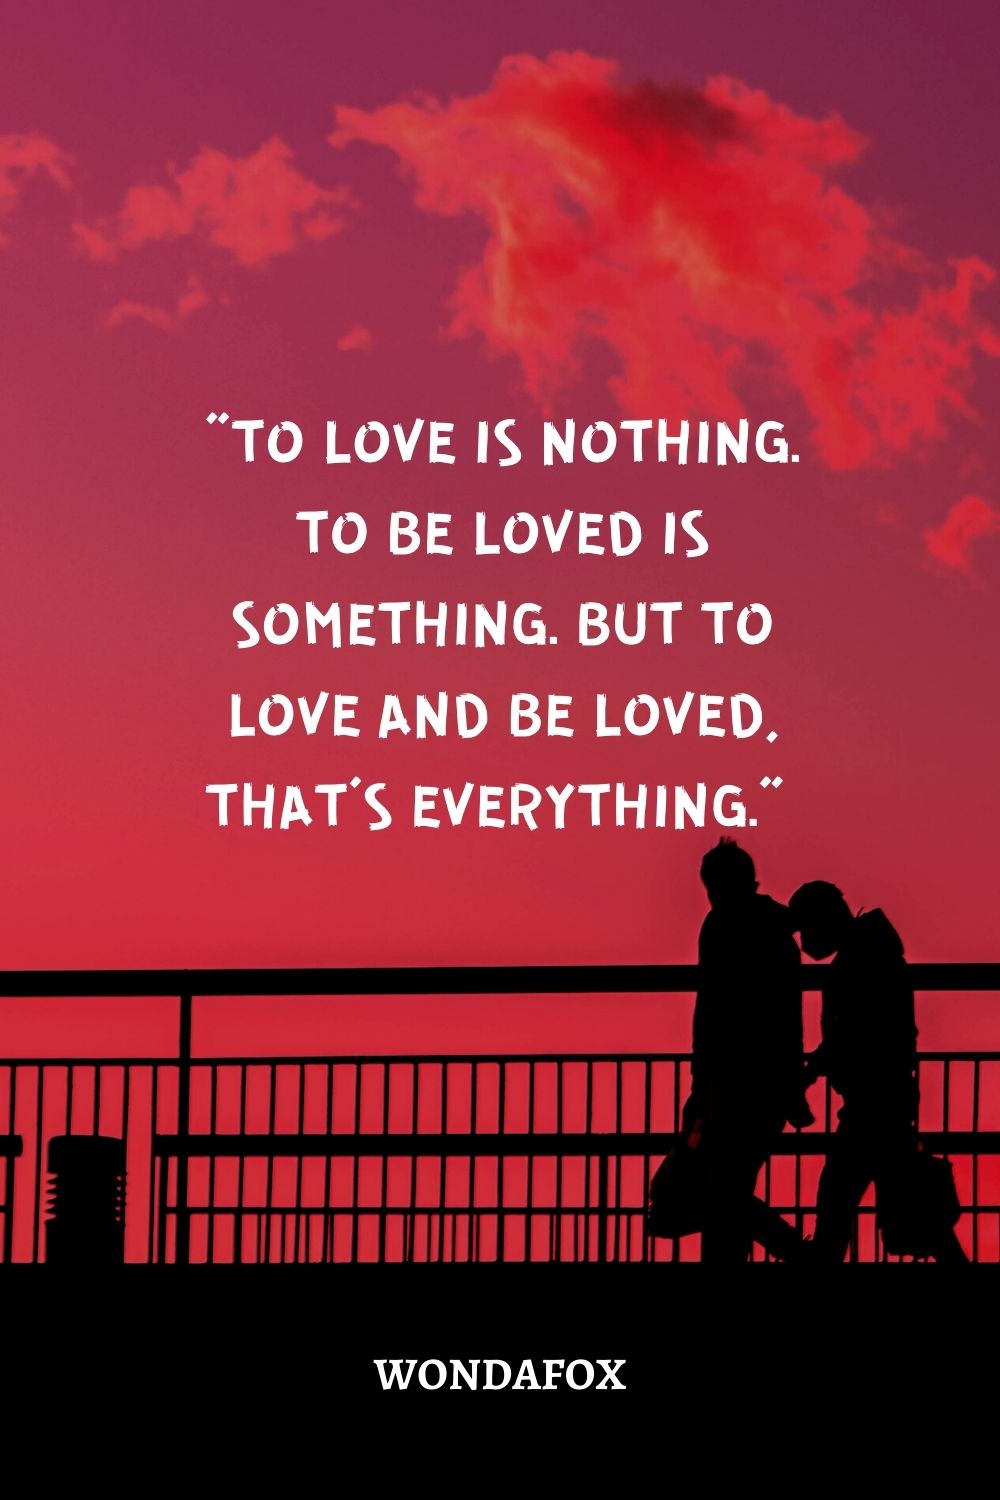 “To love is nothing. To be loved is something. But to love and be loved, that’s everything.” 
T. Tolis